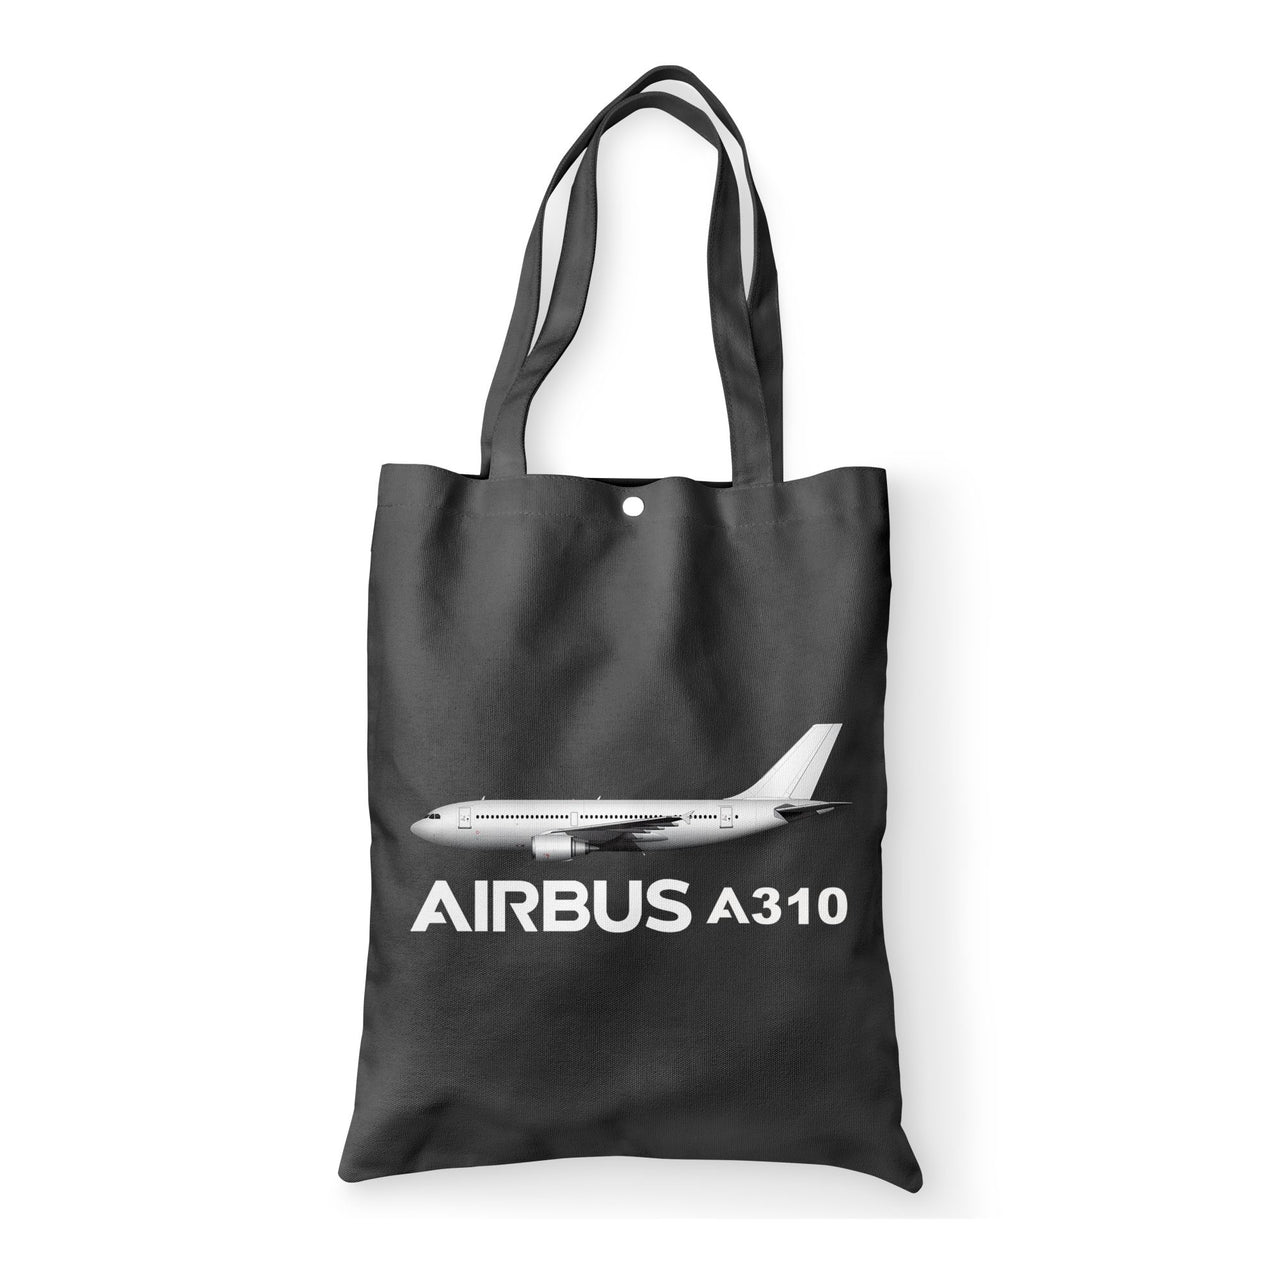 The Airbus A310 Designed Tote Bags